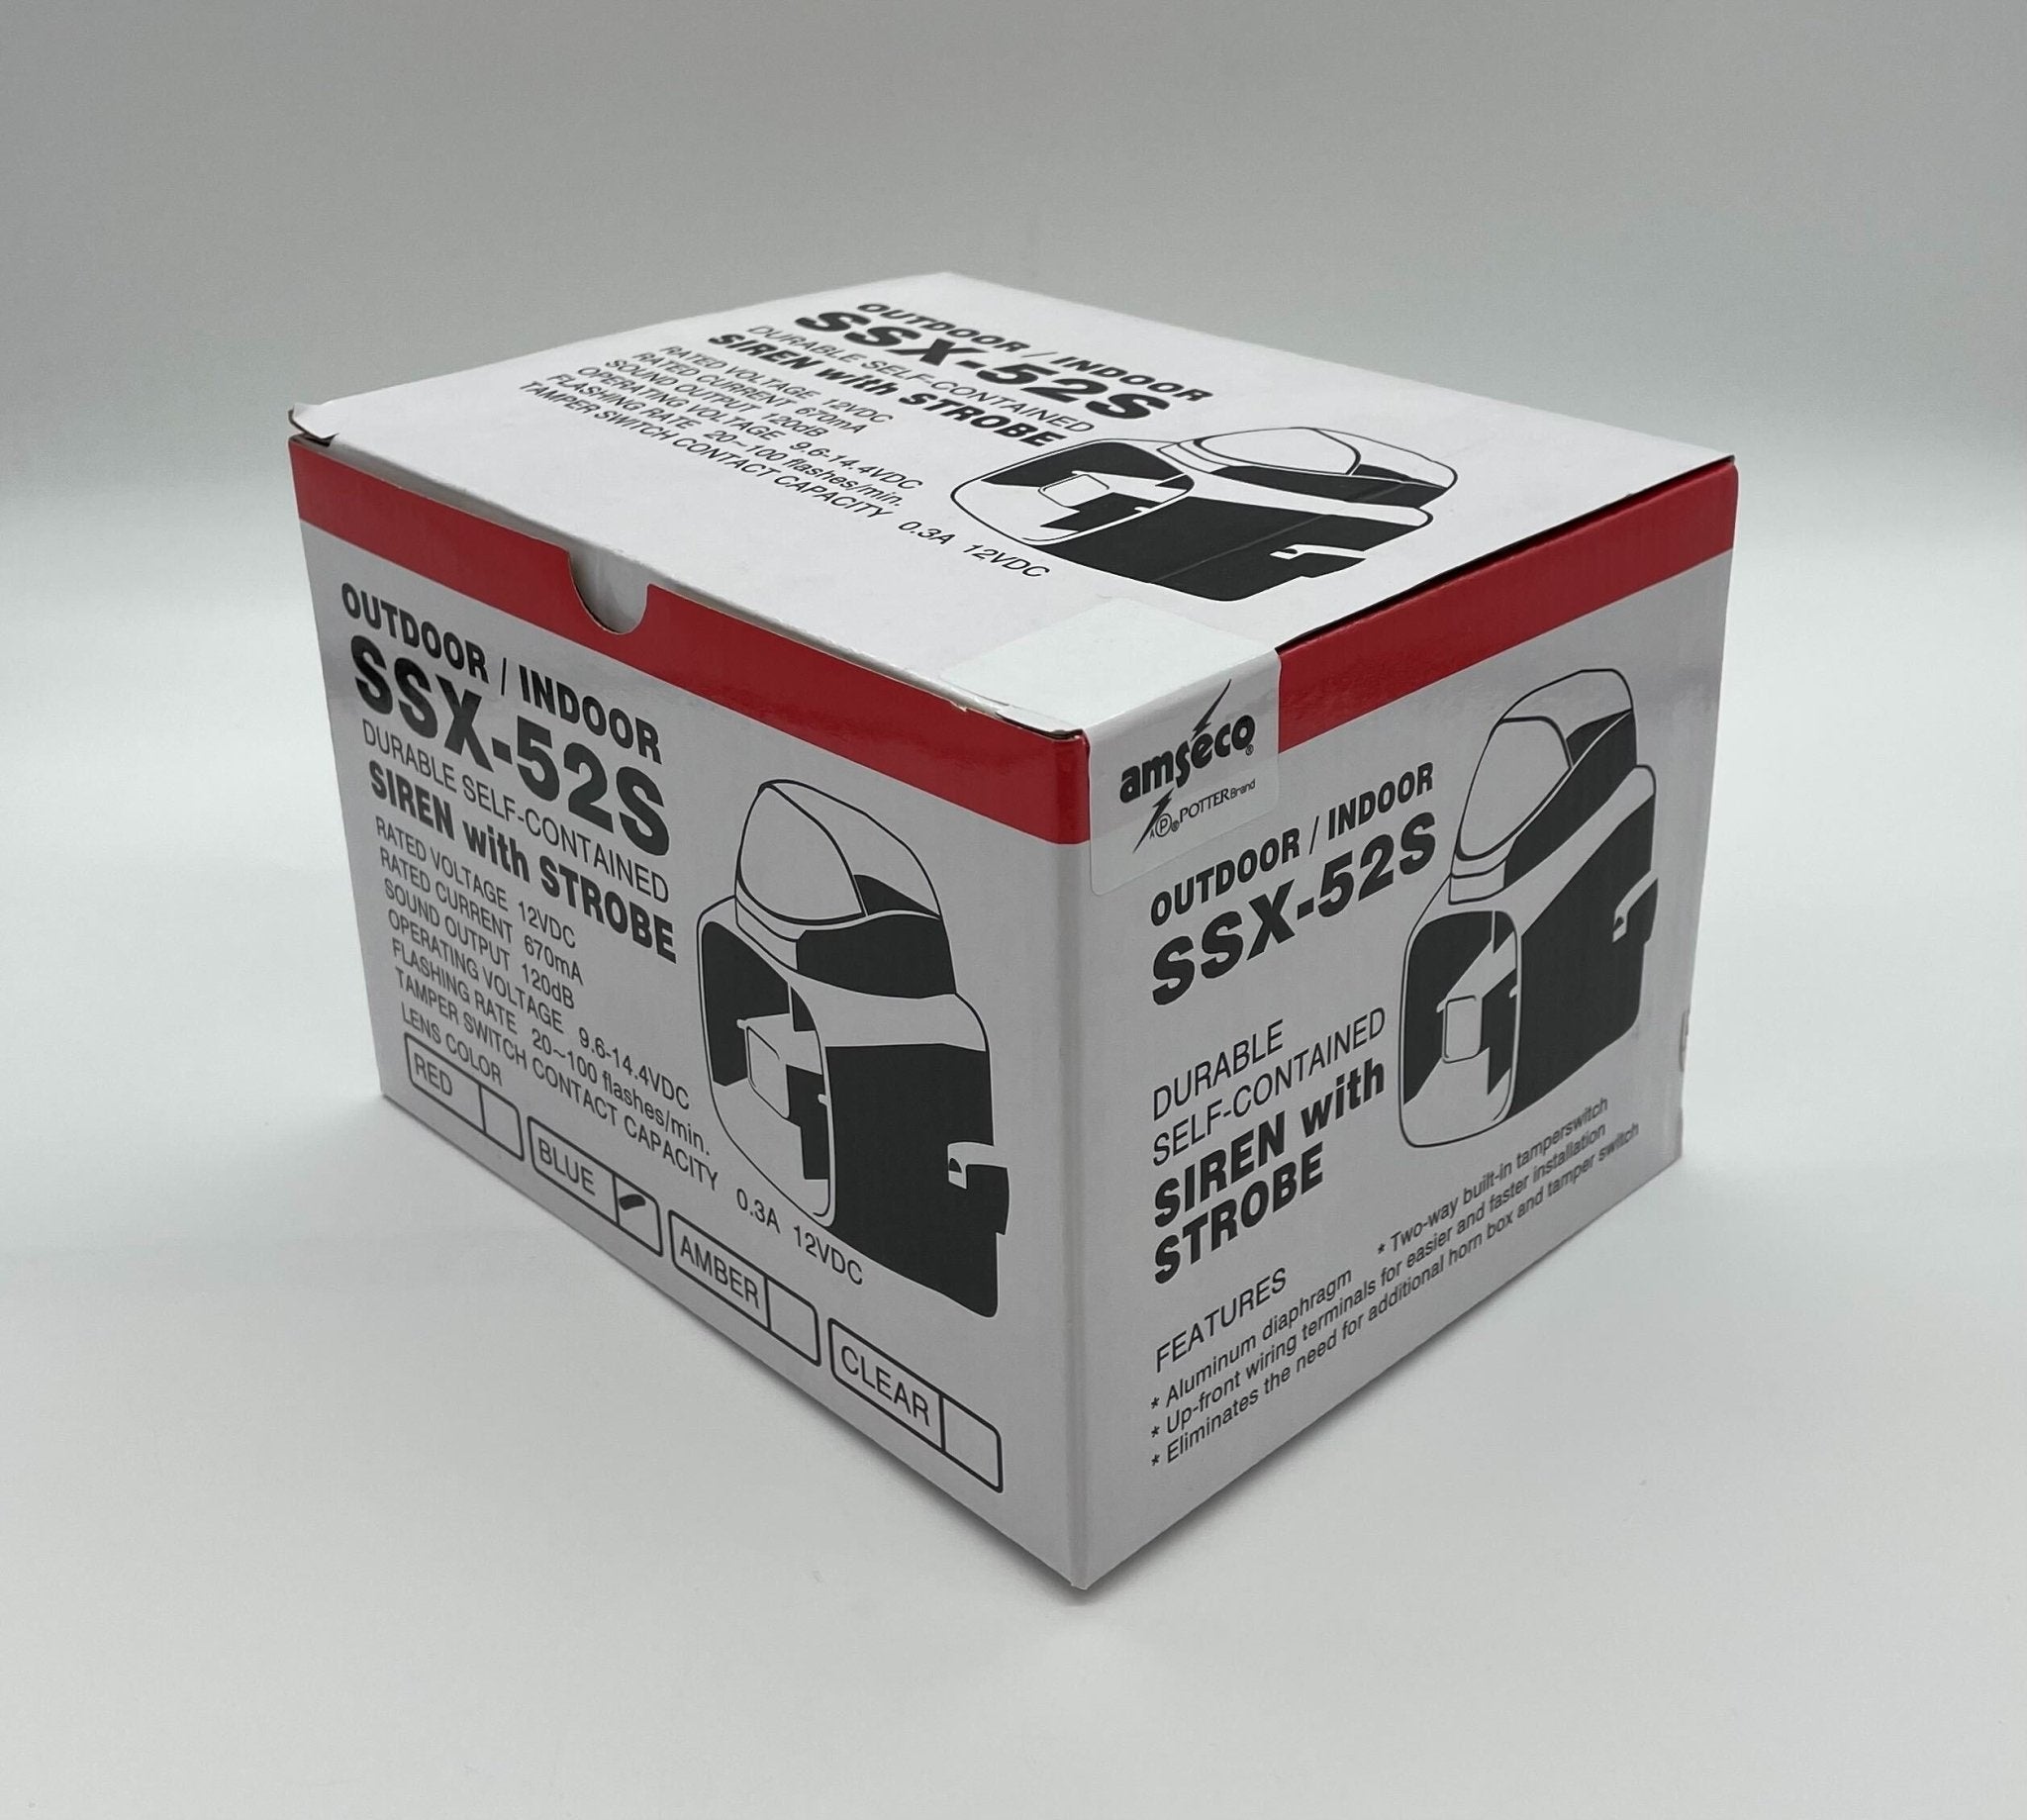 Potter SSX-52SB - The Fire Alarm Supplier